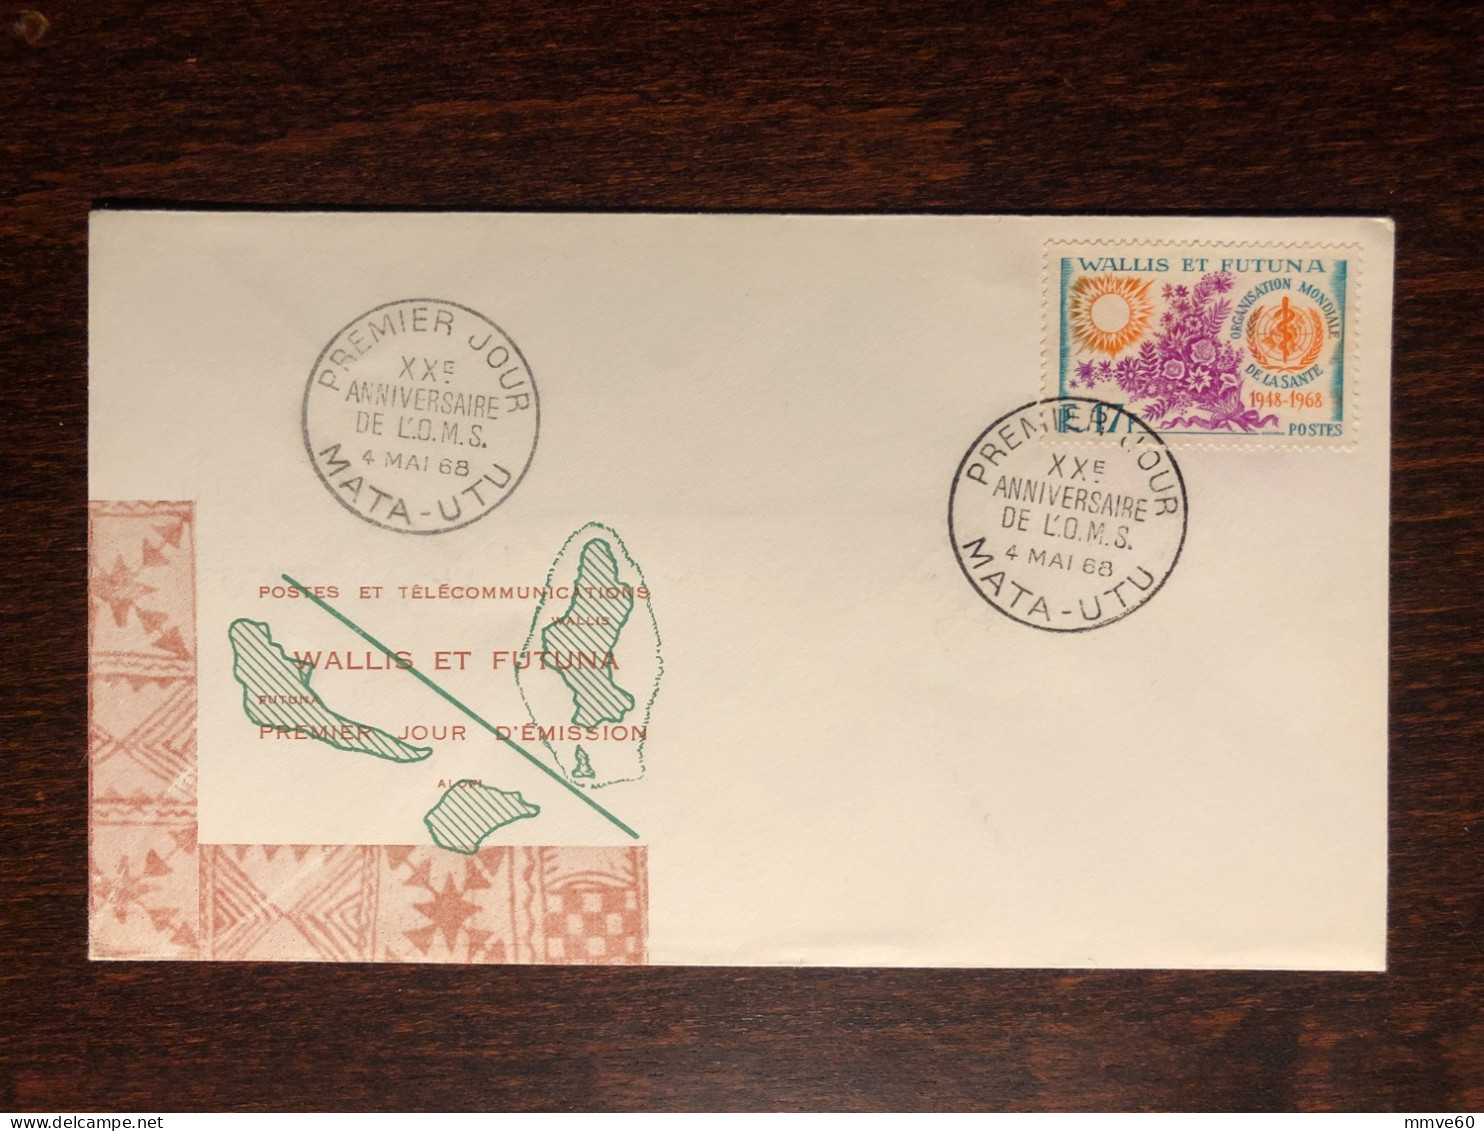 WALLIS & FUTUNA FDC COVER 1968 YEAR WHO HEALTH MEDICINE STAMPS - Lettres & Documents